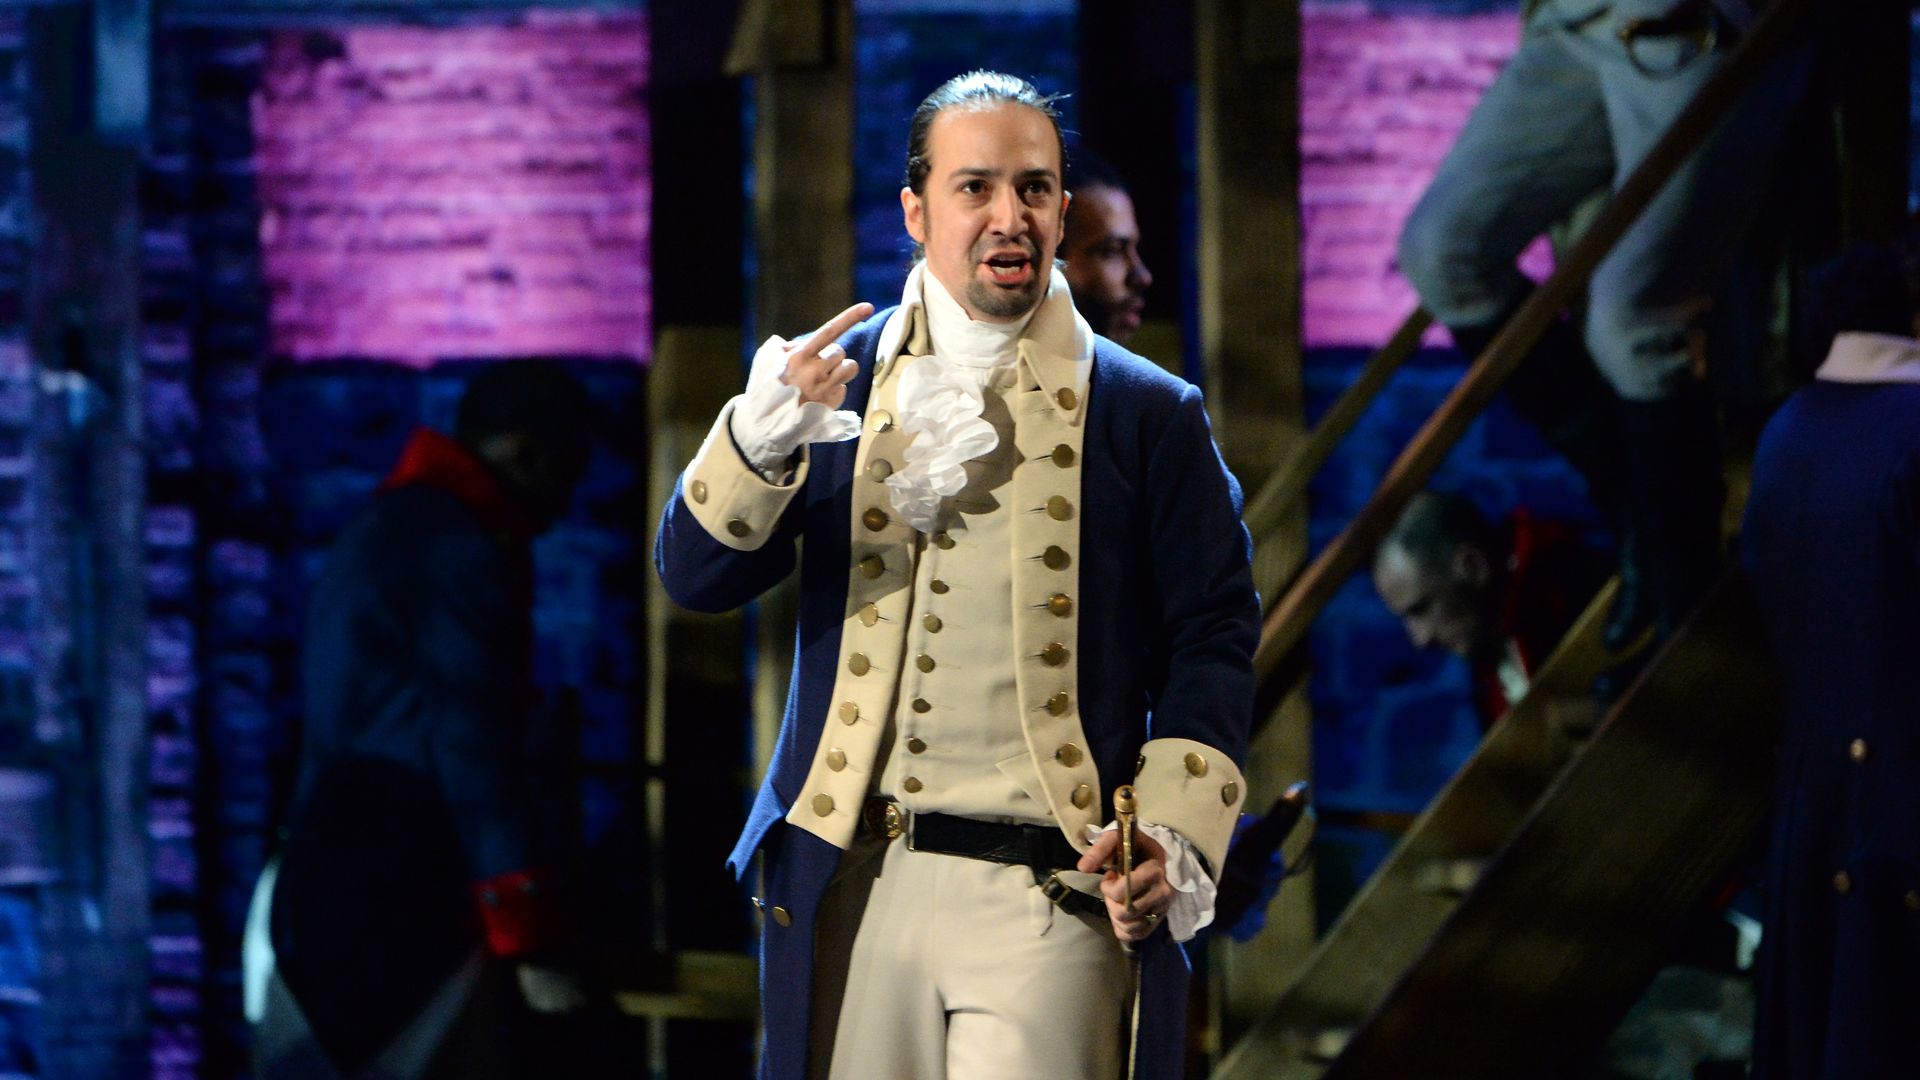 Lin-Manuel Miranda performing onstage during the 70th Annual Tony Awards in 2016